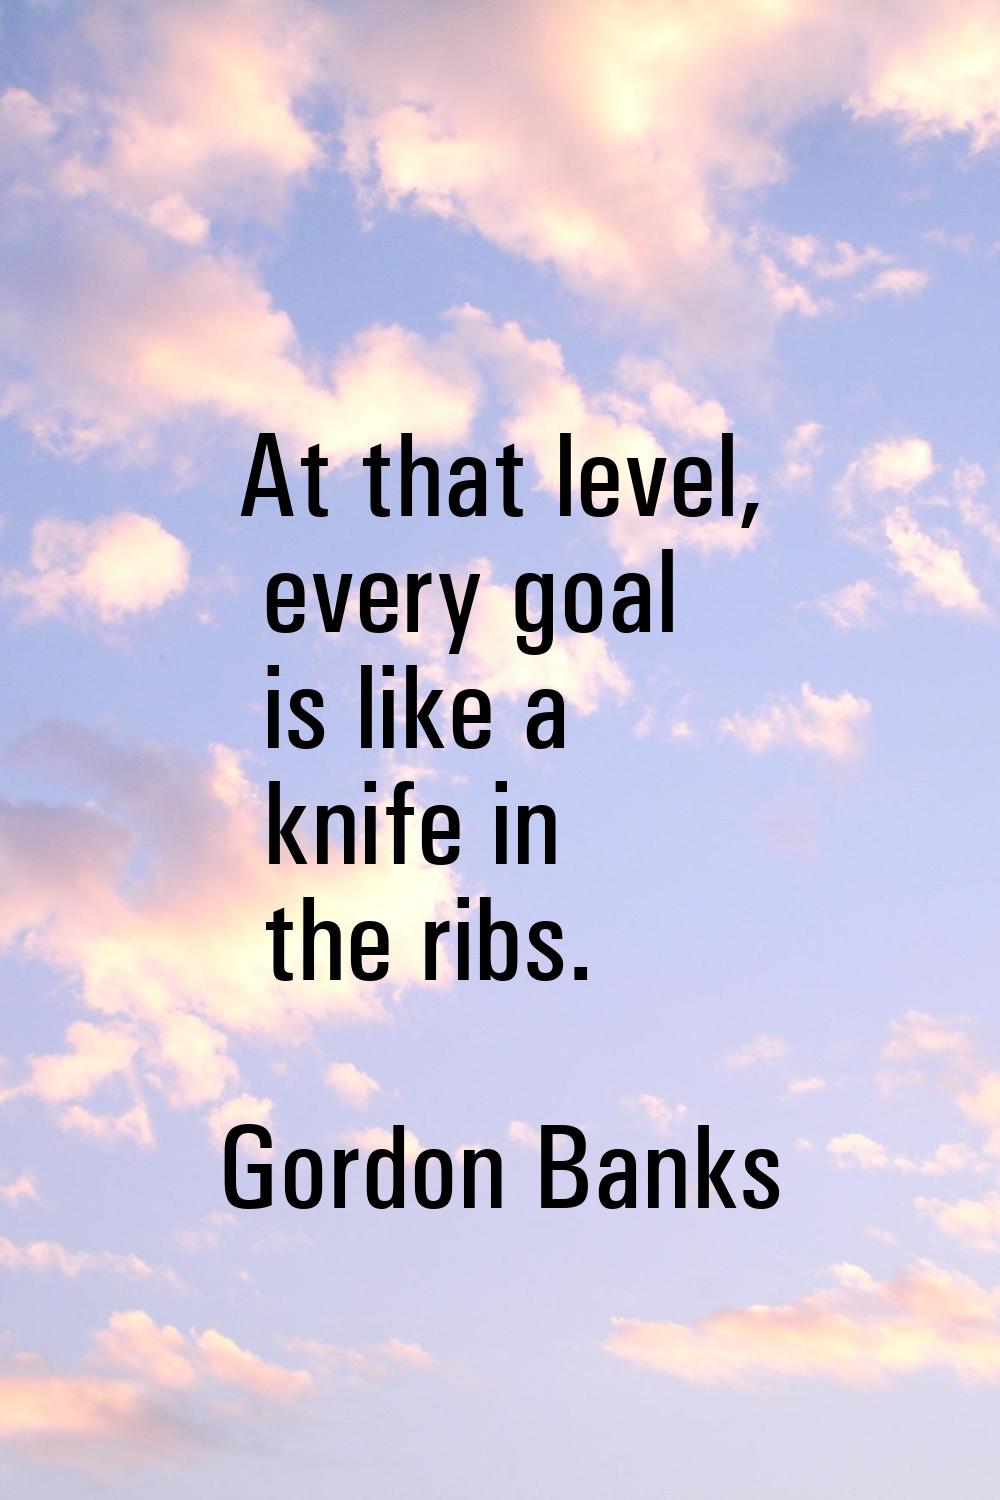 At that level, every goal is like a knife in the ribs.